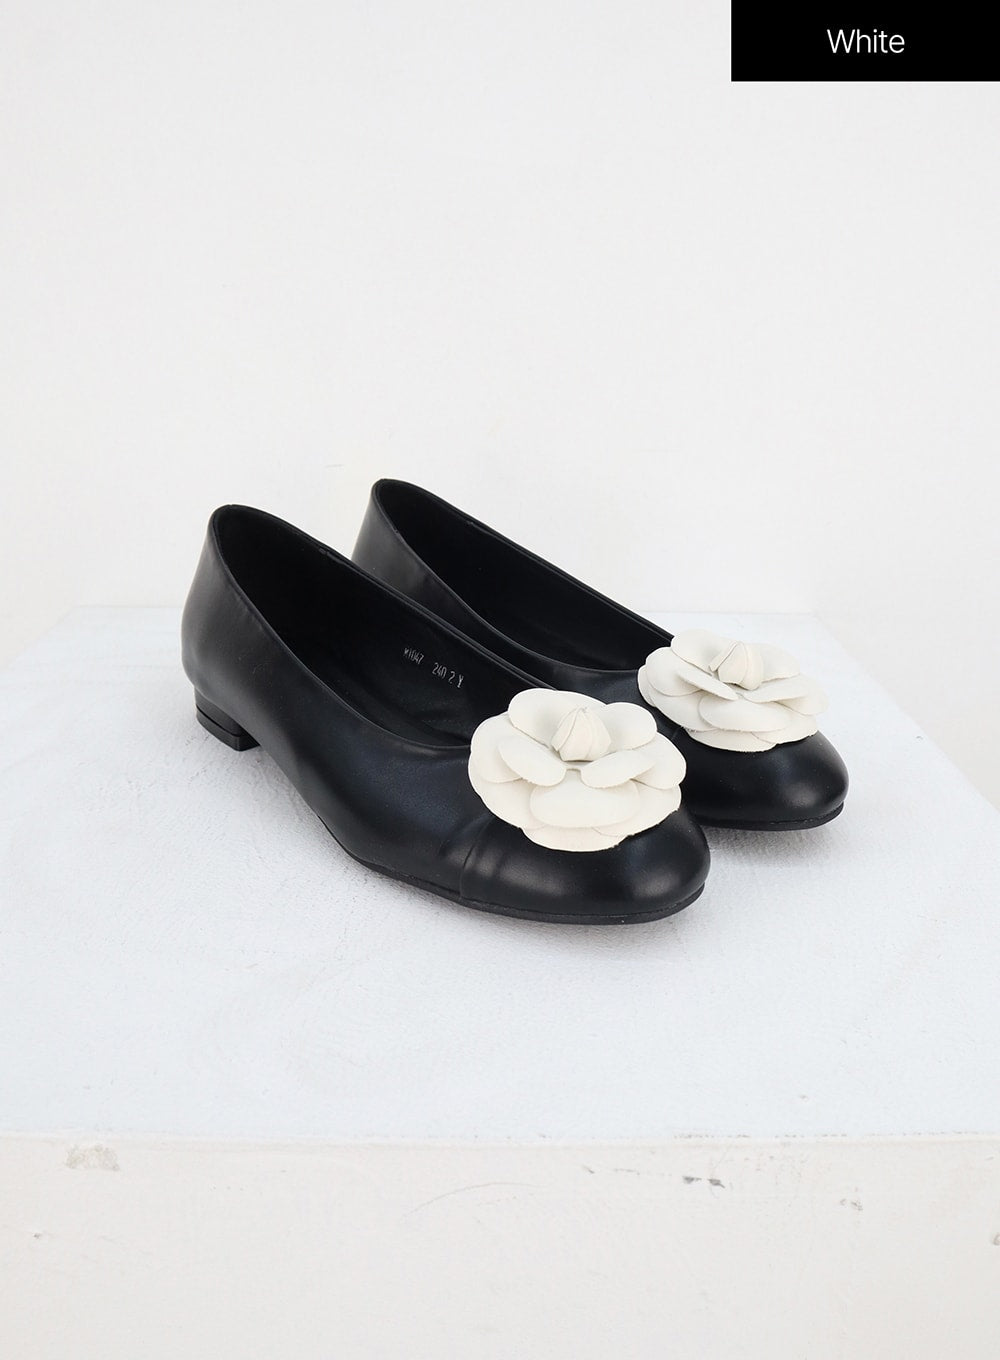 Authentic Chanel Black Solid Satin Shoes on sale at JHROP. Luxury